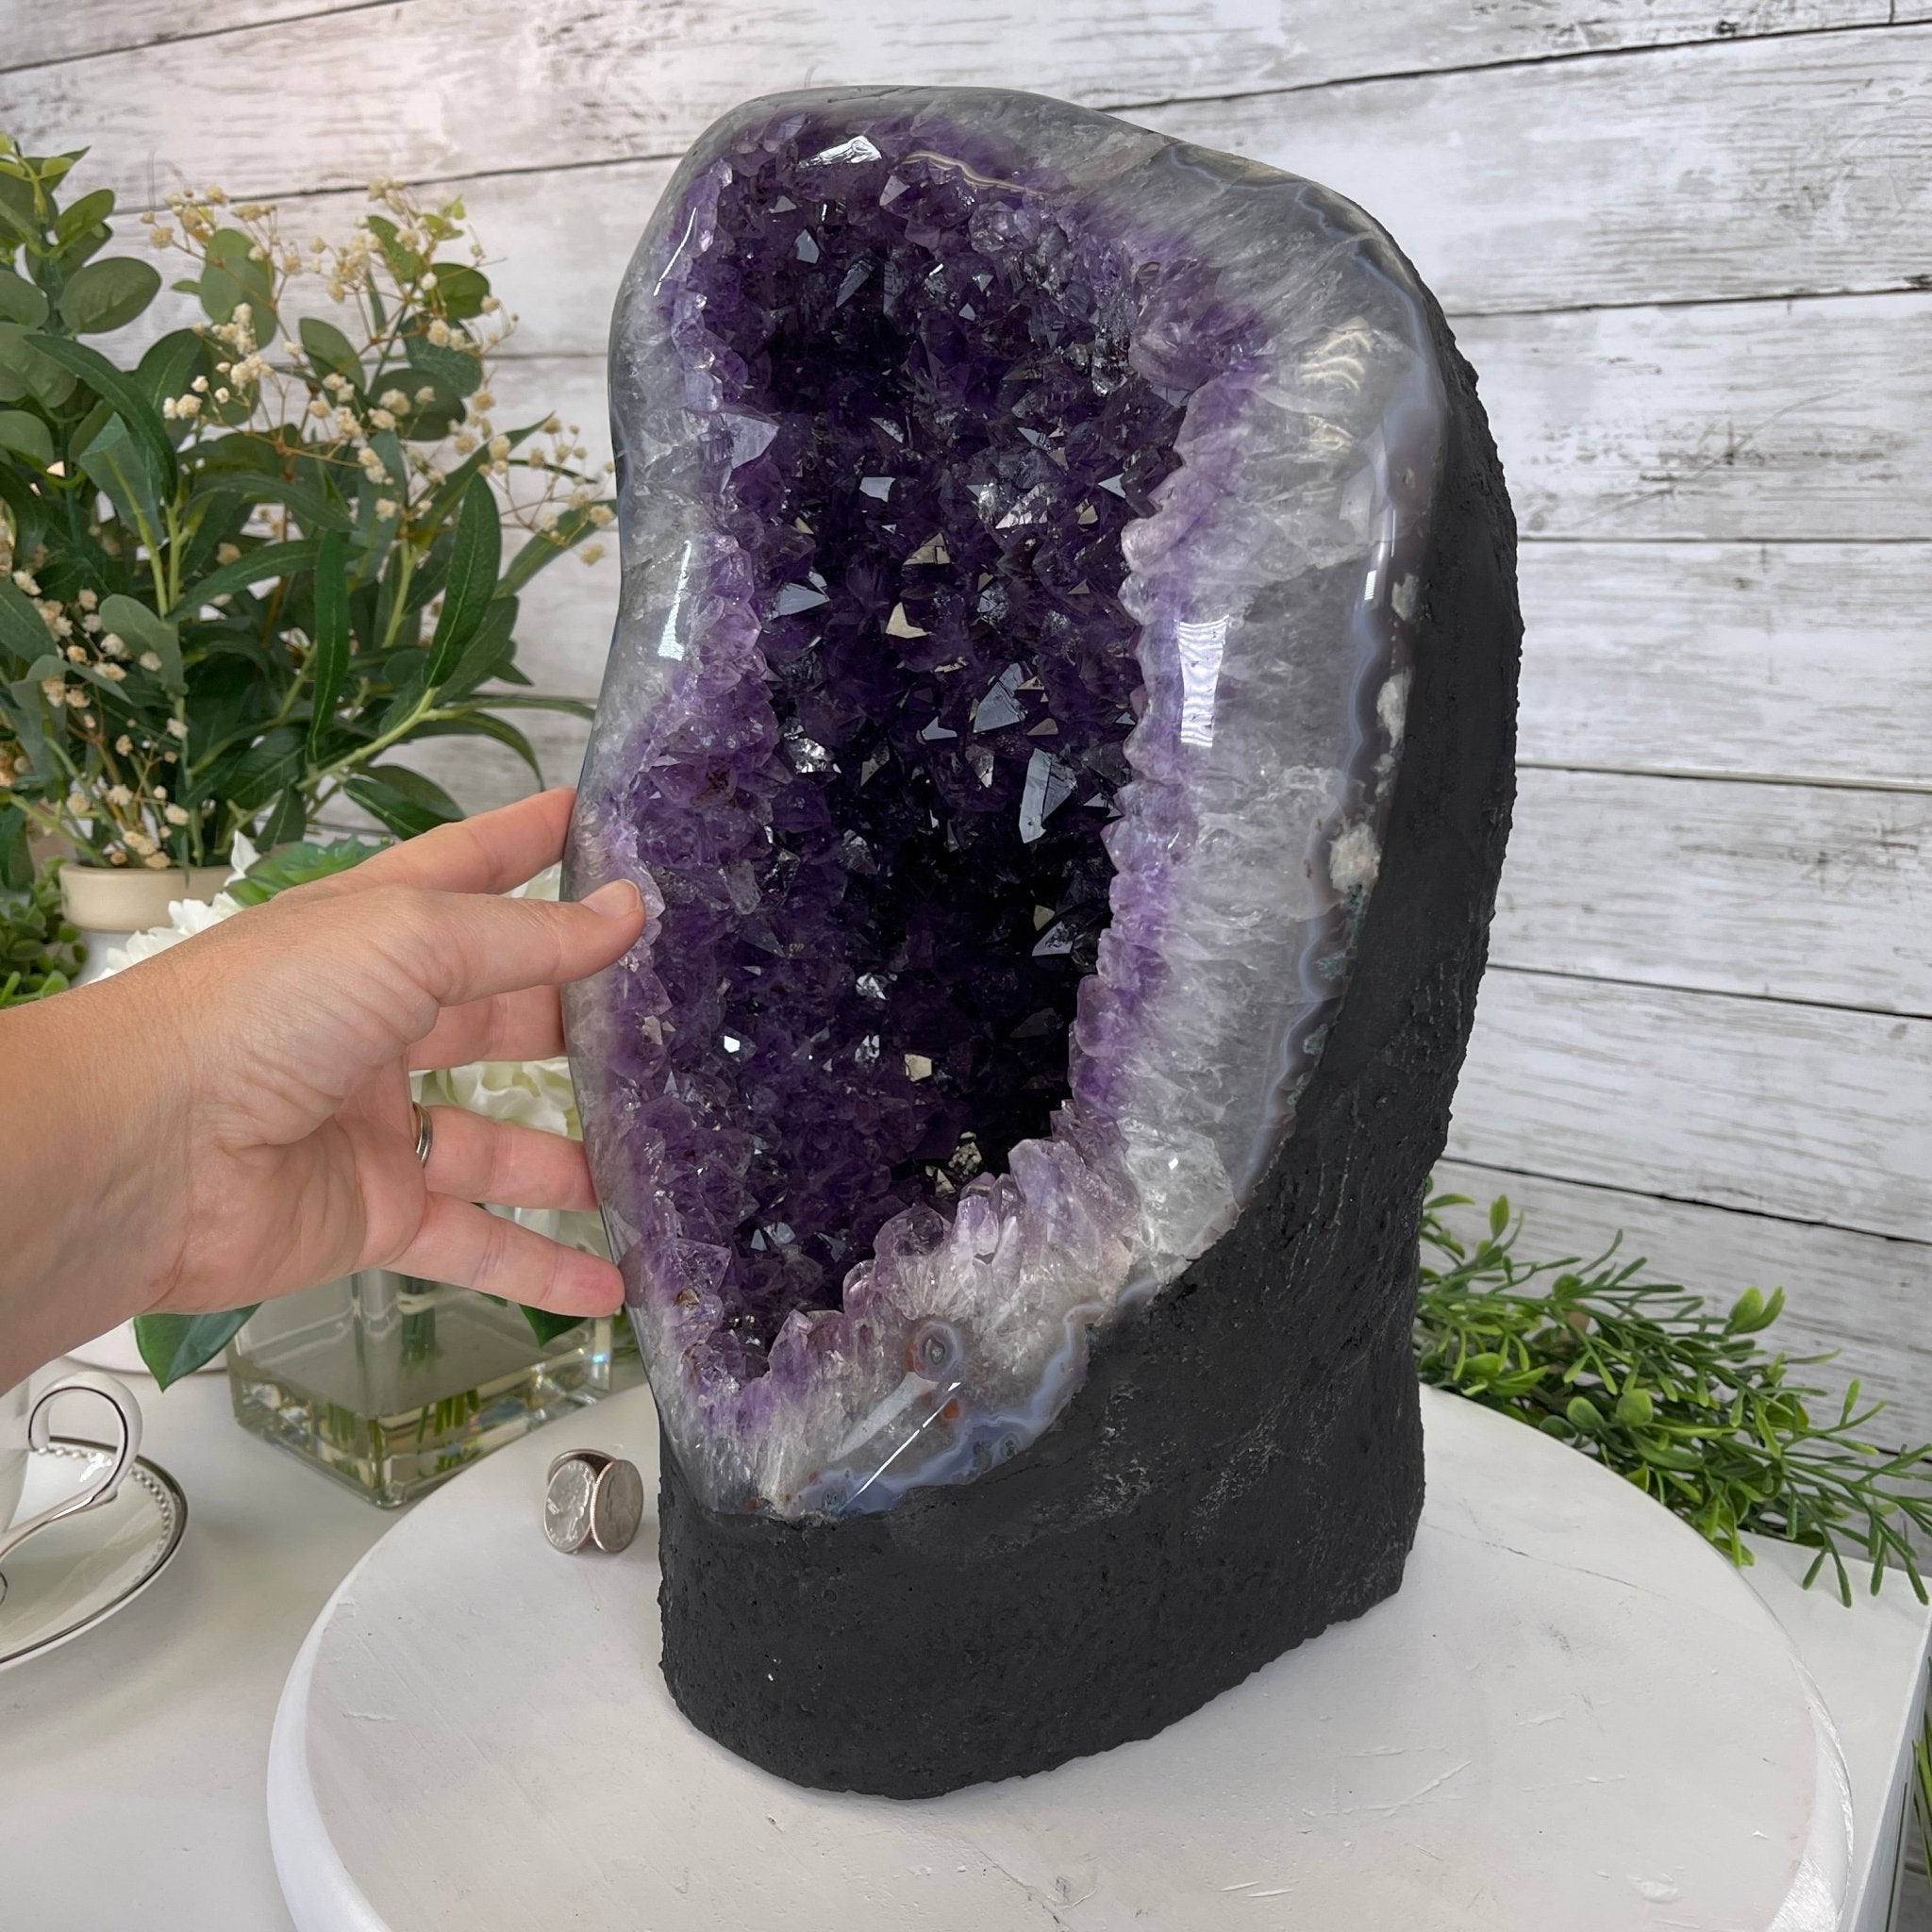 Extra Quality Amethyst Druse Cluster on Cement Base, 34.8 lbs and 14.75" Tall #5614-0031 - Brazil GemsBrazil GemsExtra Quality Amethyst Druse Cluster on Cement Base, 34.8 lbs and 14.75" Tall #5614-0031Clusters on Cement Bases5614-0031